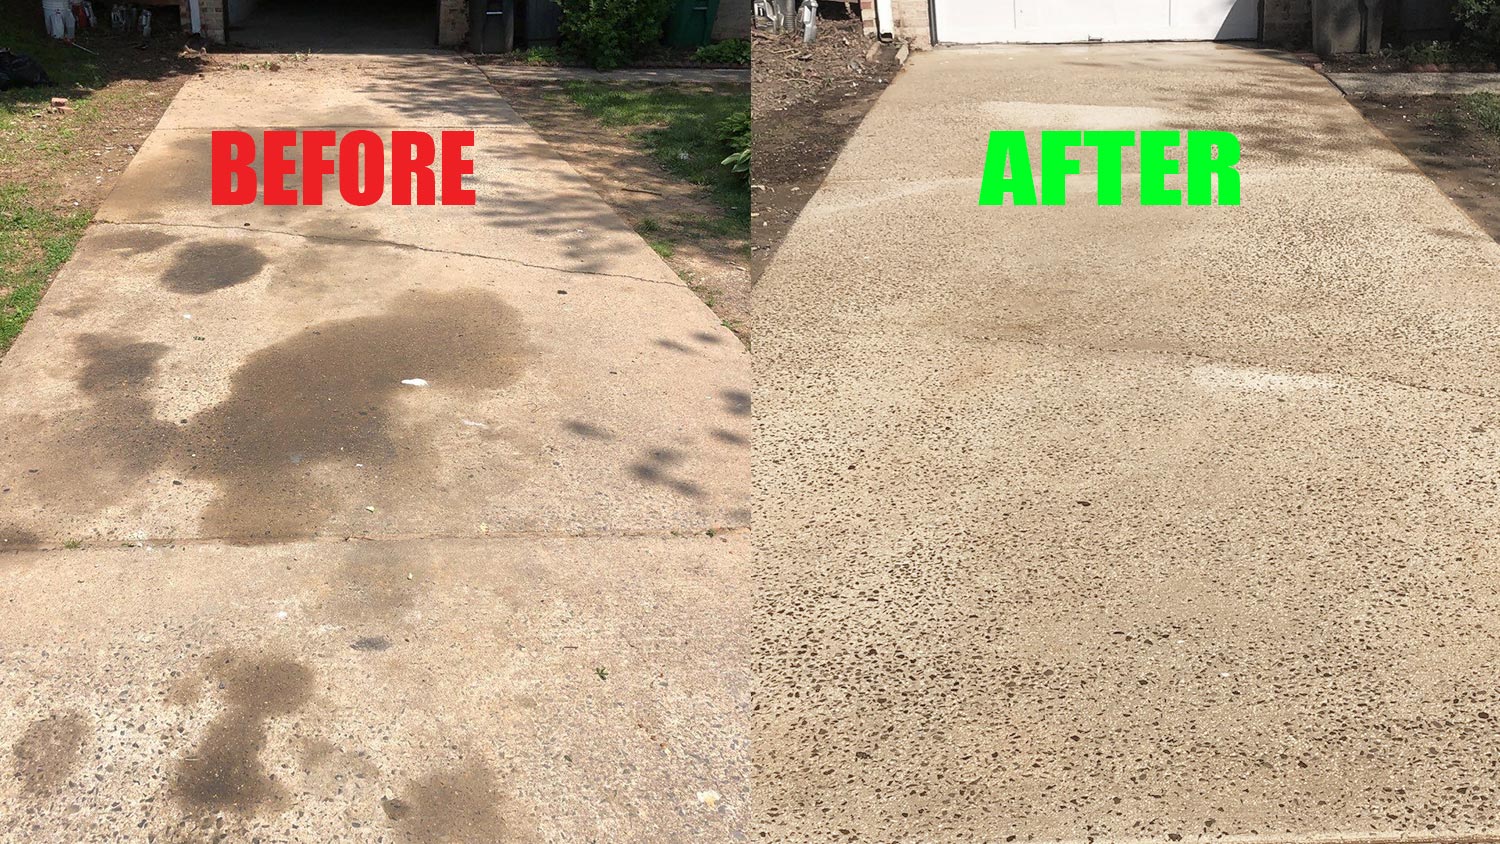 Nastee Industrial Degreaser - Concrete Clean - Remove oil stains